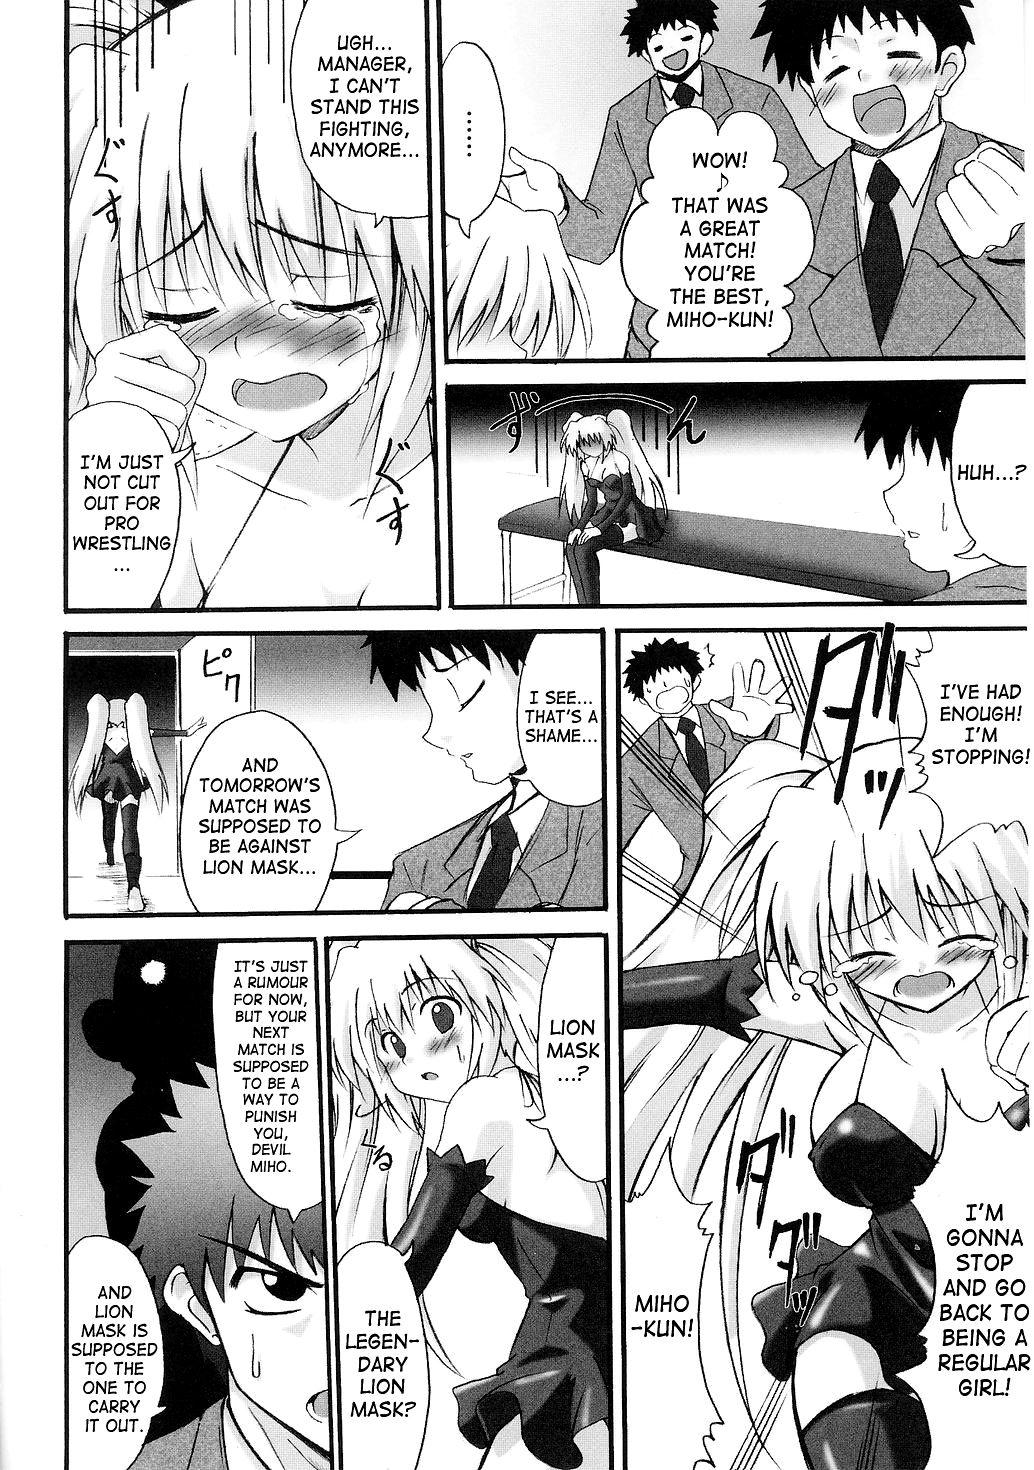 Tight Ass Devil Miho Legend Blond - Page 2